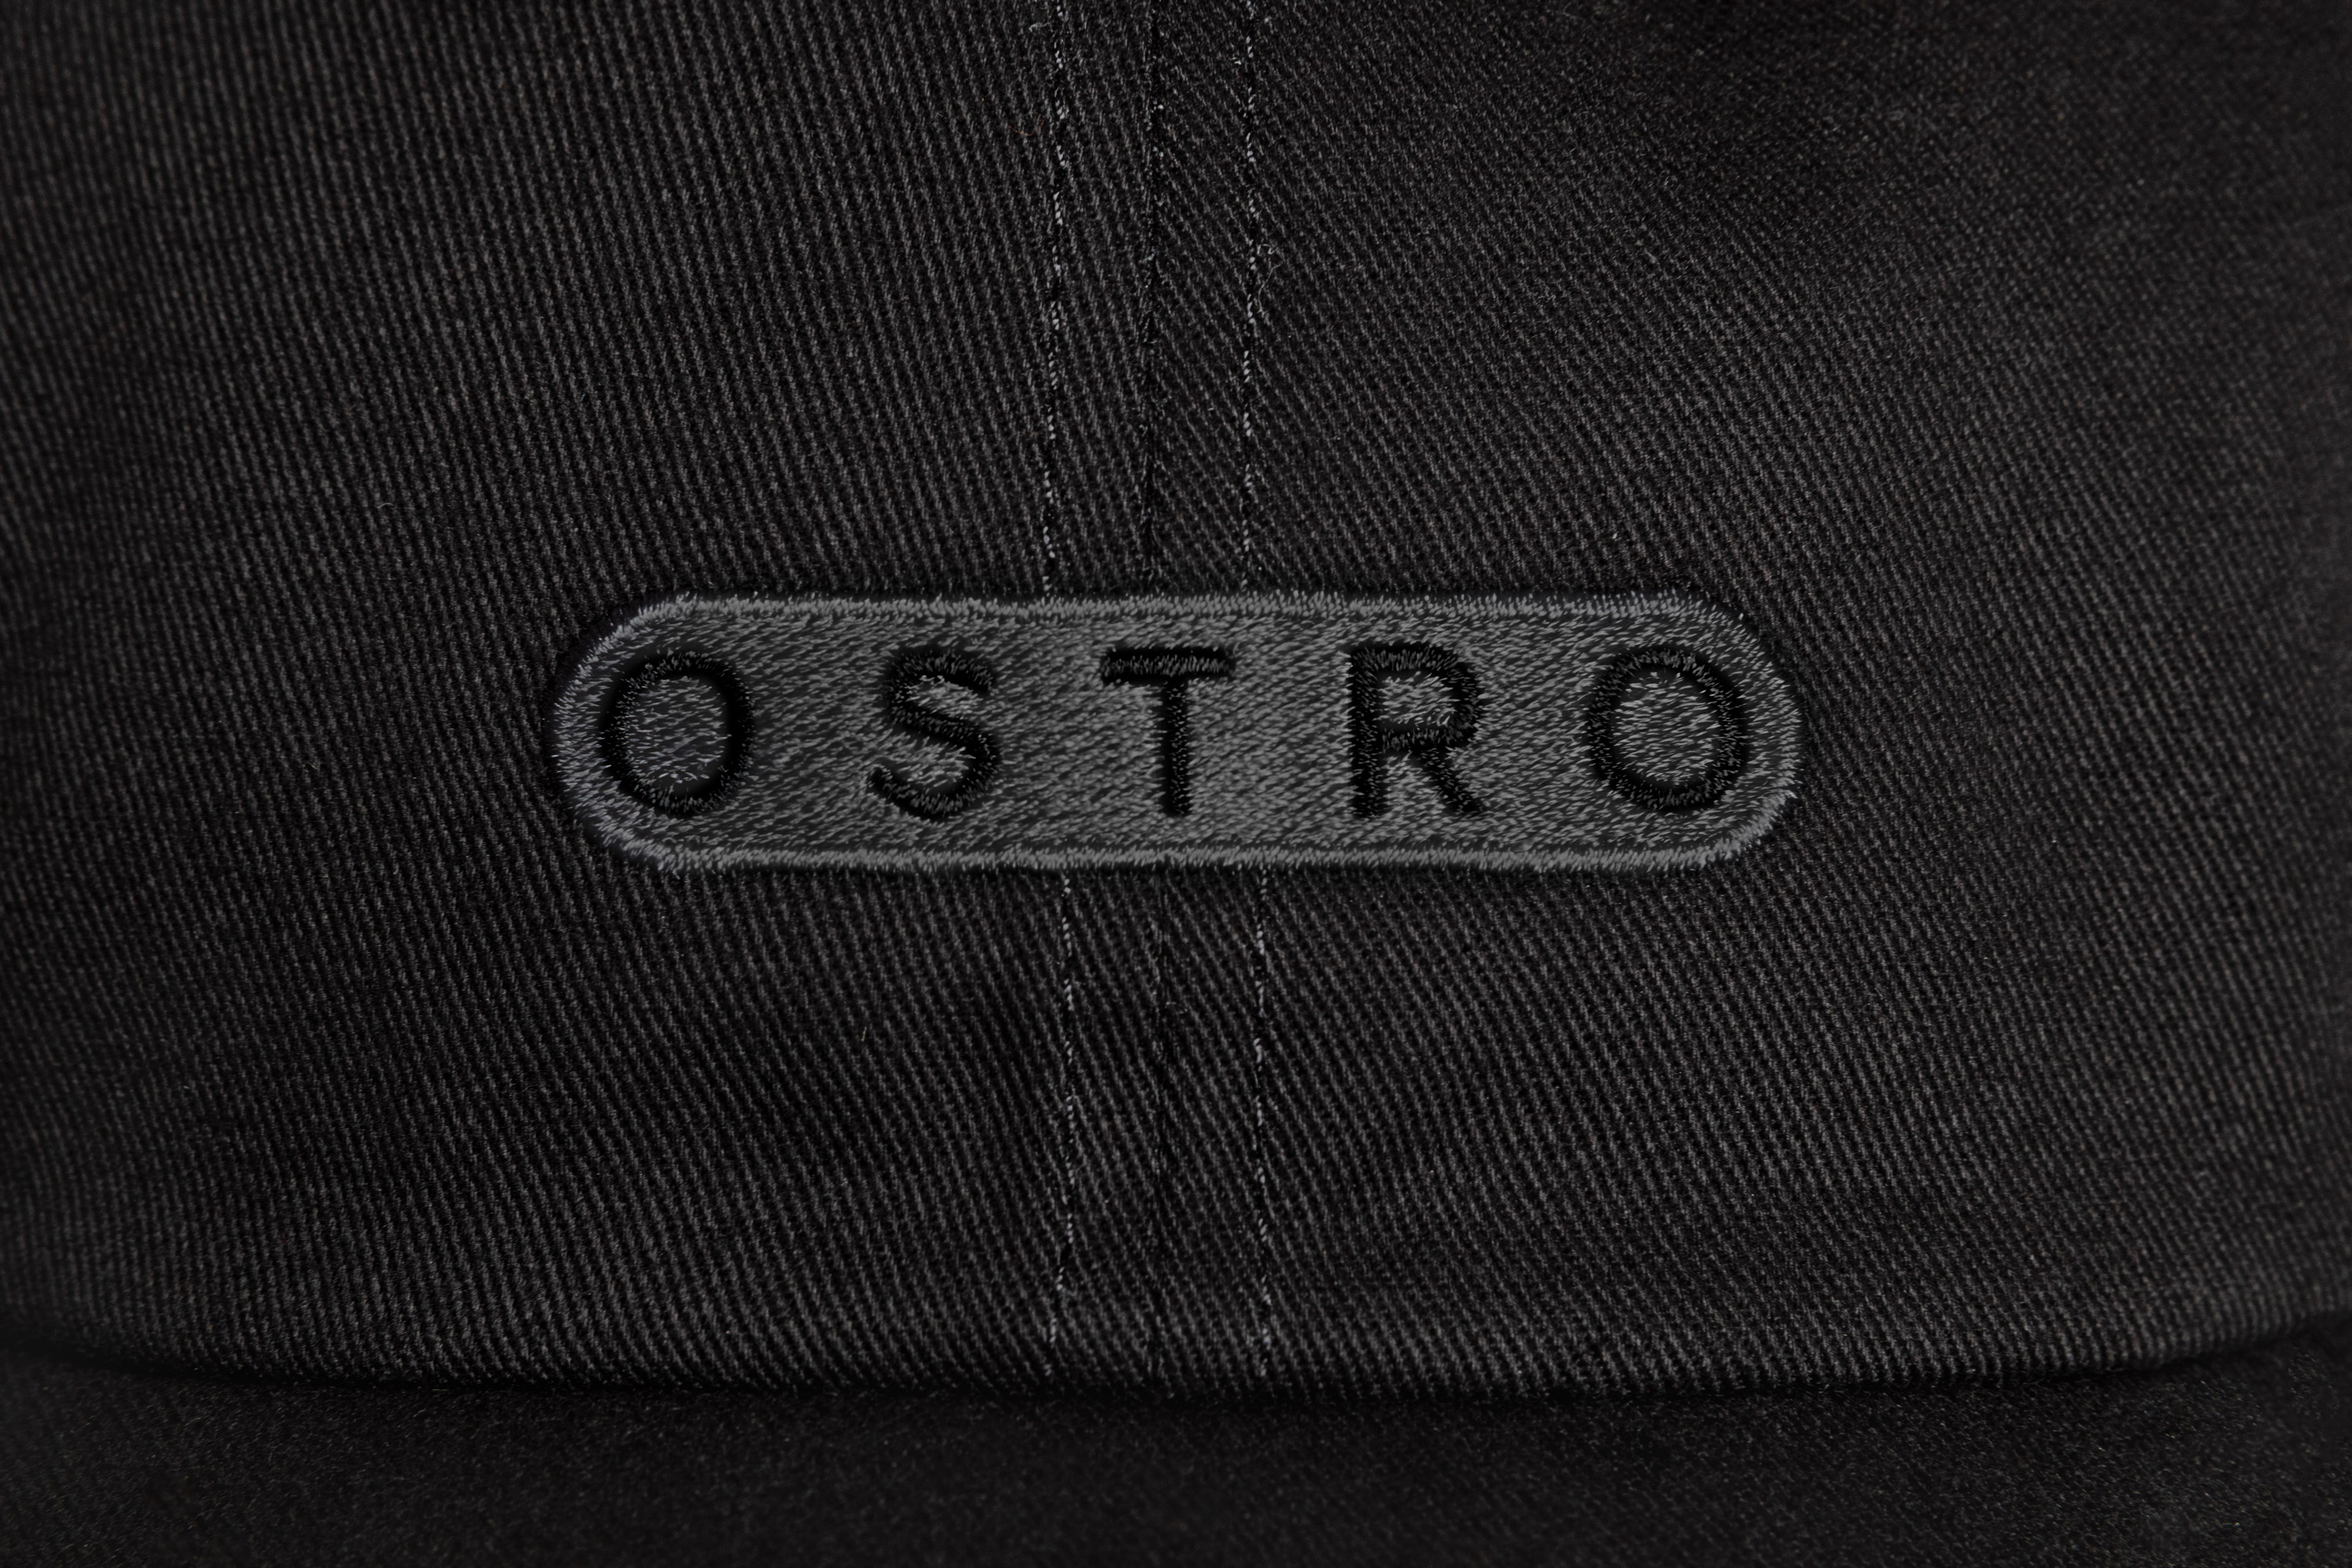 Brand merchandise designed by Mucho for American life science software company Ostro.